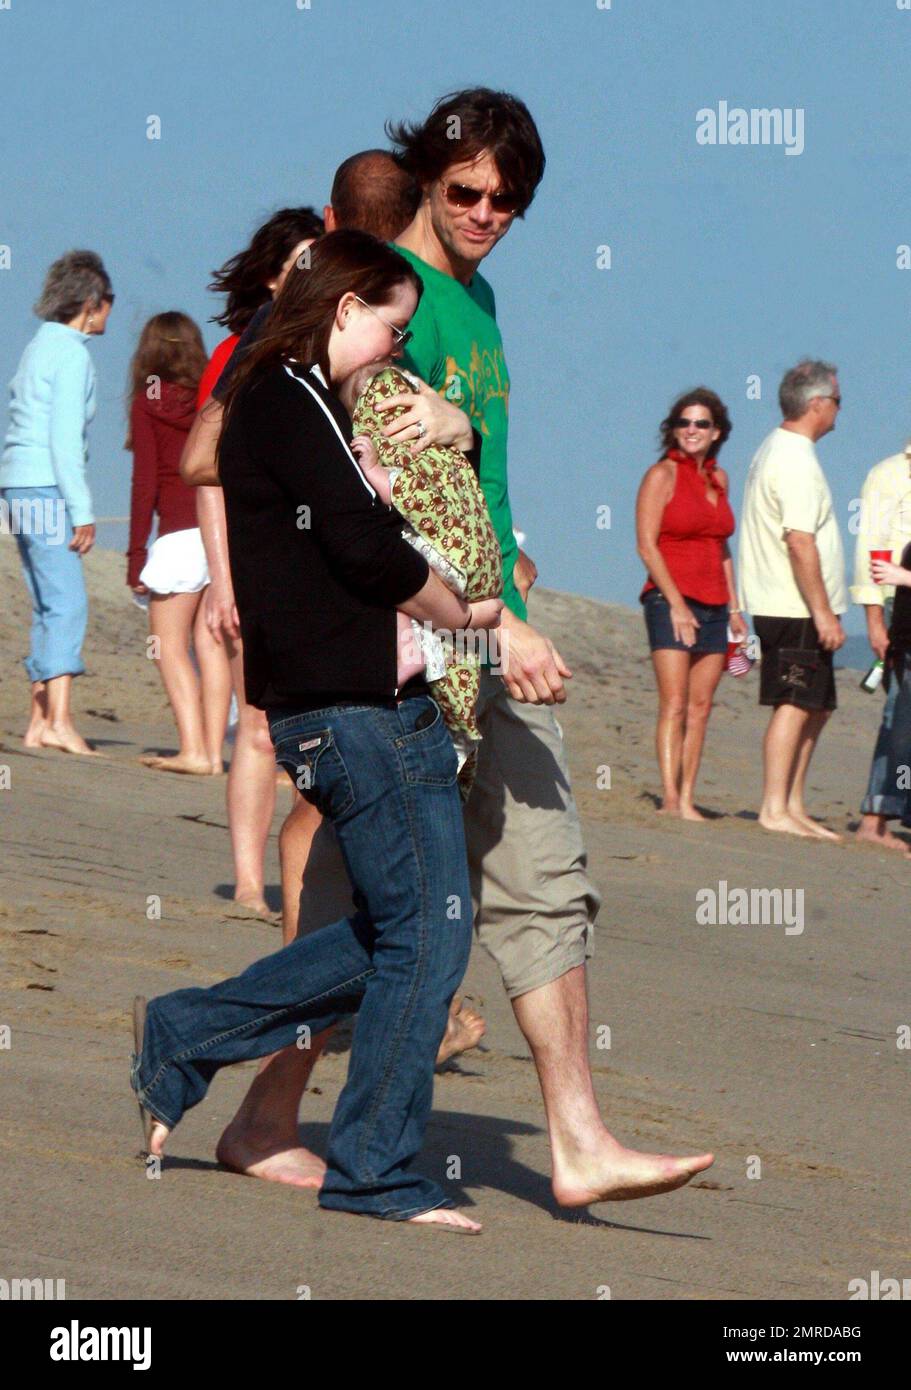 Jim Carrey celebrates the Fourth of July by hosting a beach party at his home. Carrey's daughter Jane brought his new grandson Riley Santana, who Jim showed off to guests that included Lisa Kudrow among other celebs. Malibu, CA. 7/4/10. Stock Photo